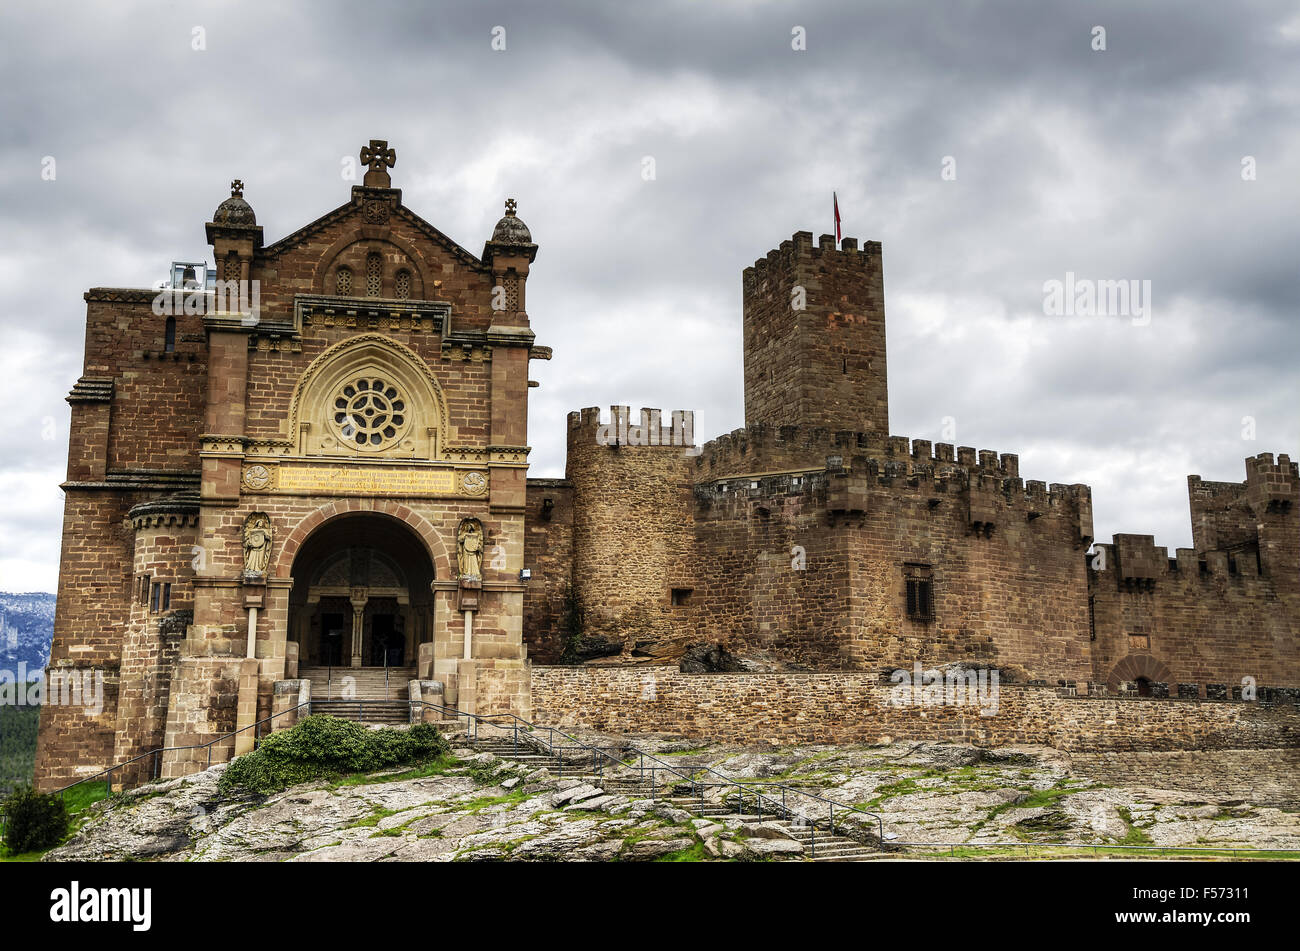 Amazing old castle in Spain, with beautiful architecture and stone details Stock Photo